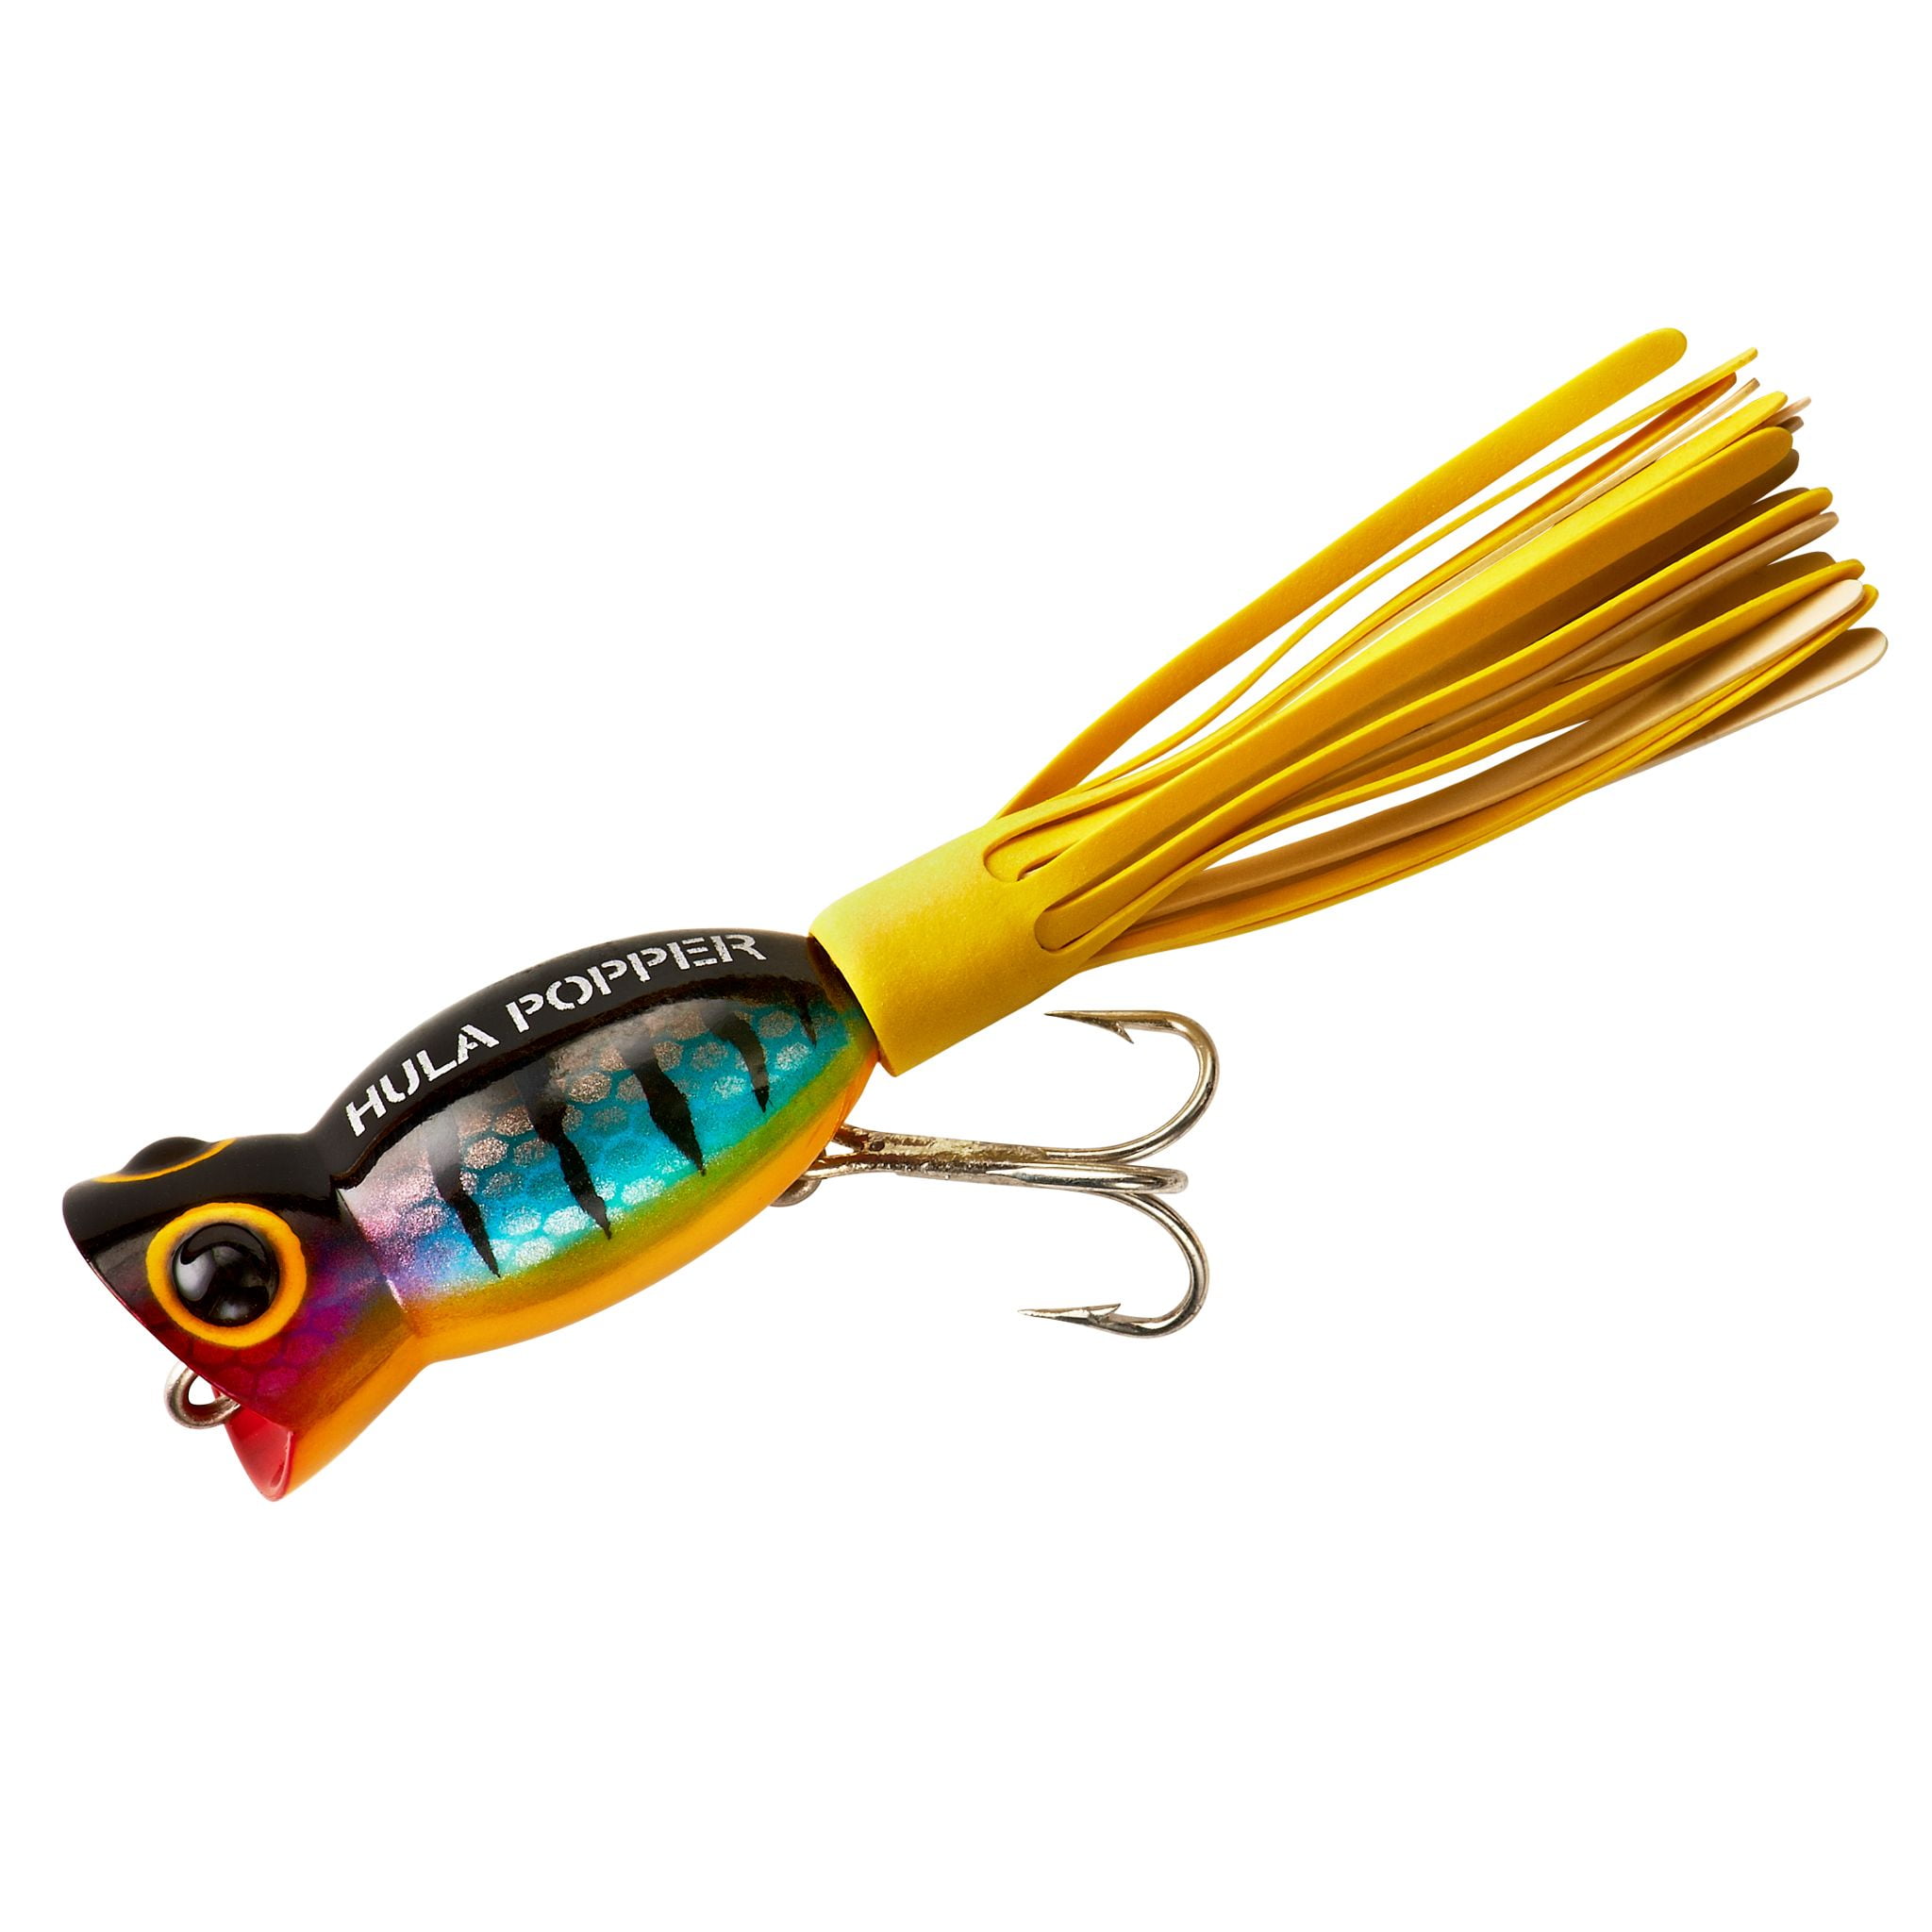  GITZIT Leech Gold Fishing Bait Lures (10-Pack), 3.5-Inch :  Fishing Soft Plastic Lures : Sports & Outdoors